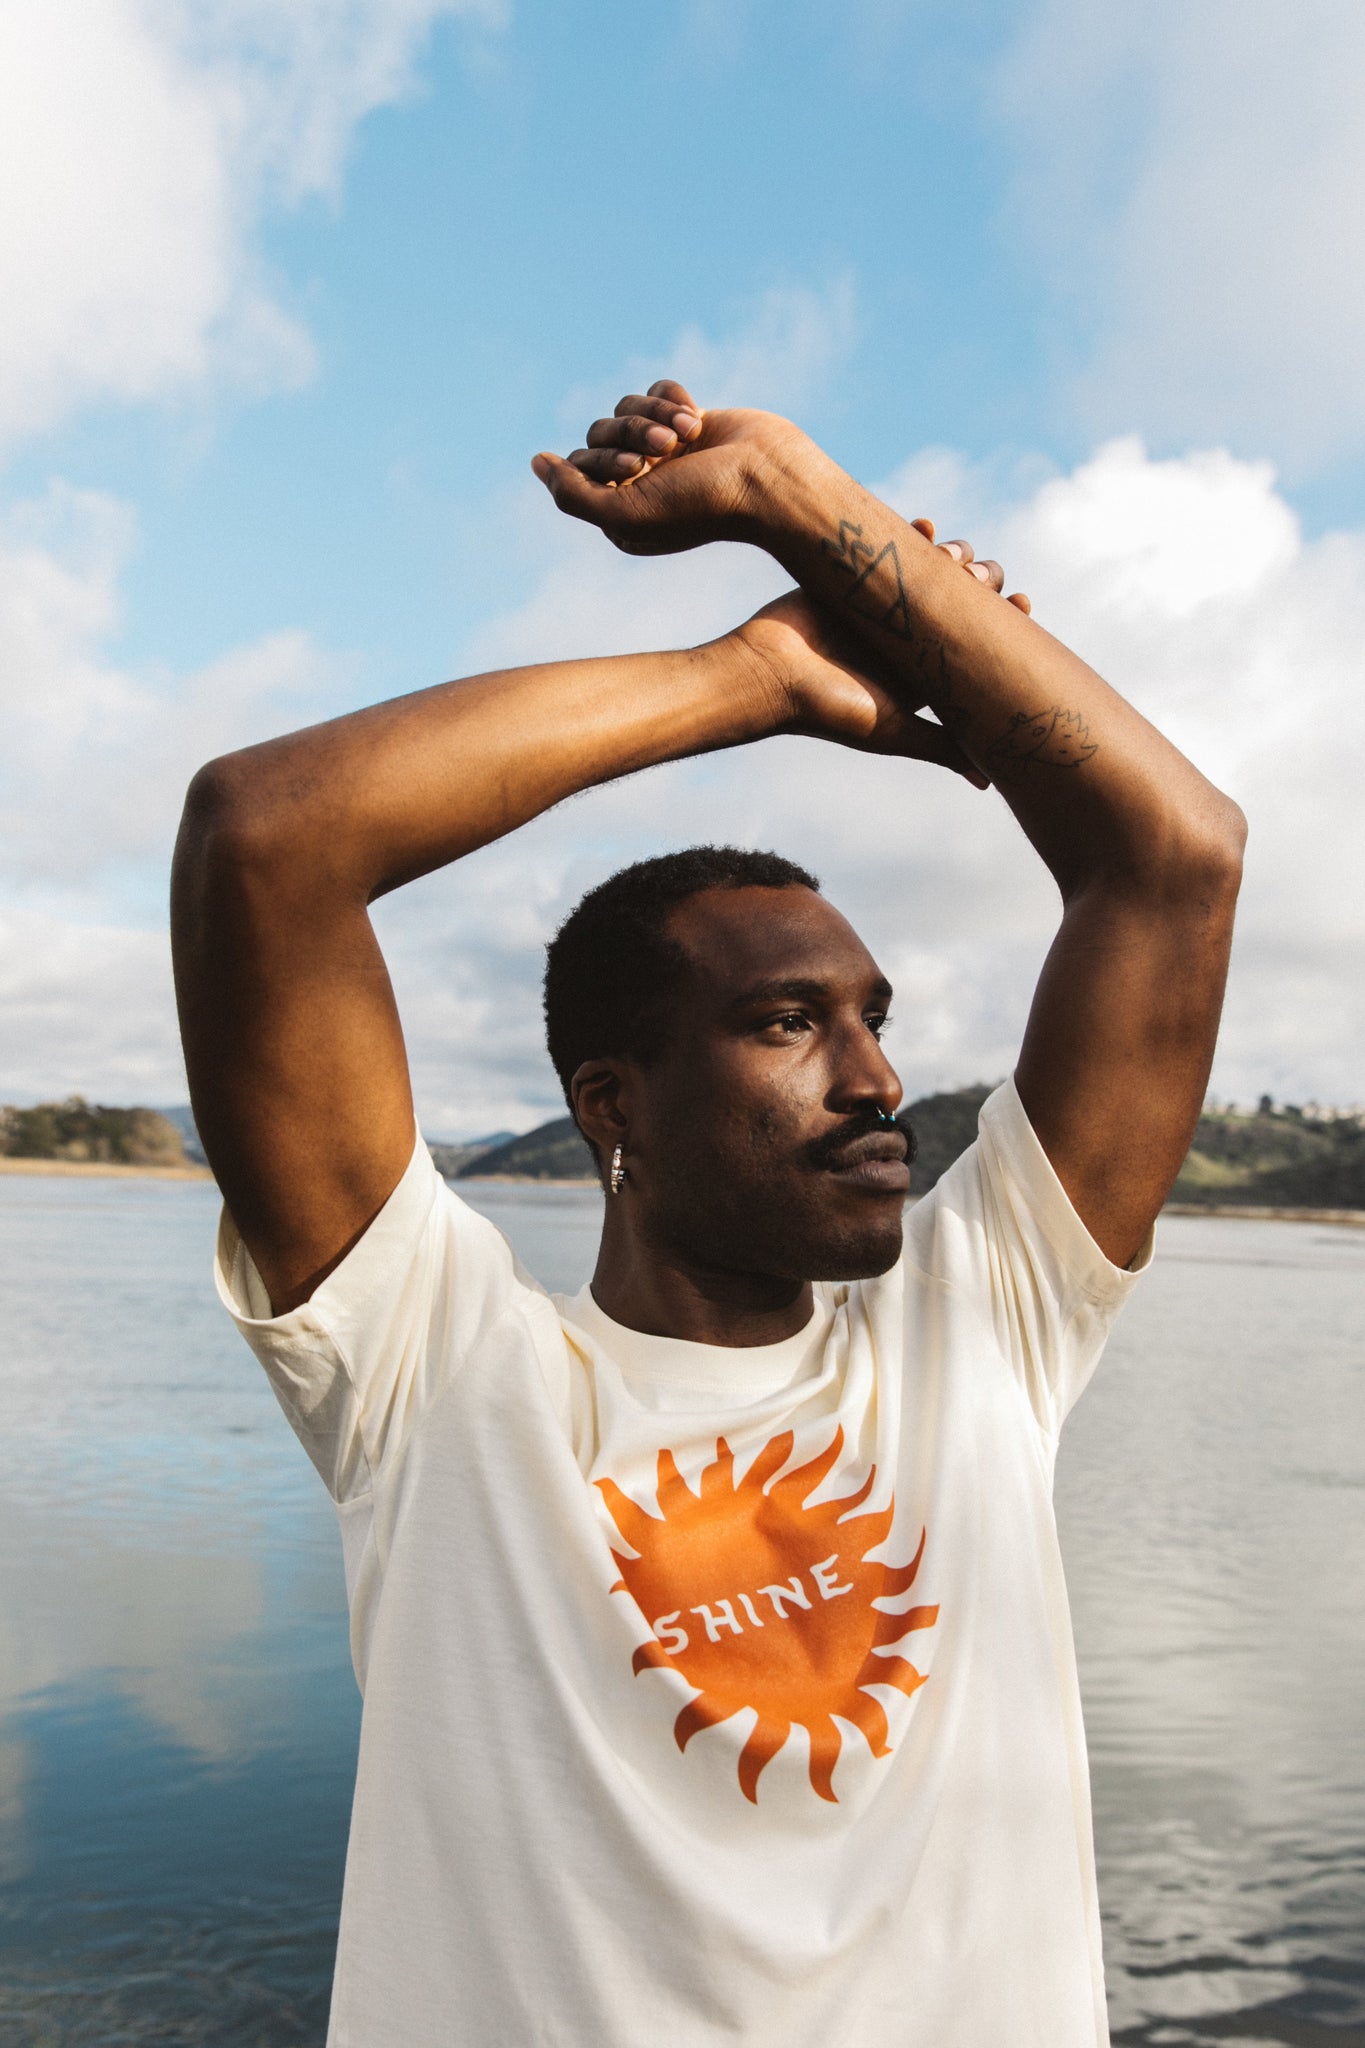 Photograph of man wearing cream colored short sleeve shirt with dark orange sun and word "shine" while having arms in the air.